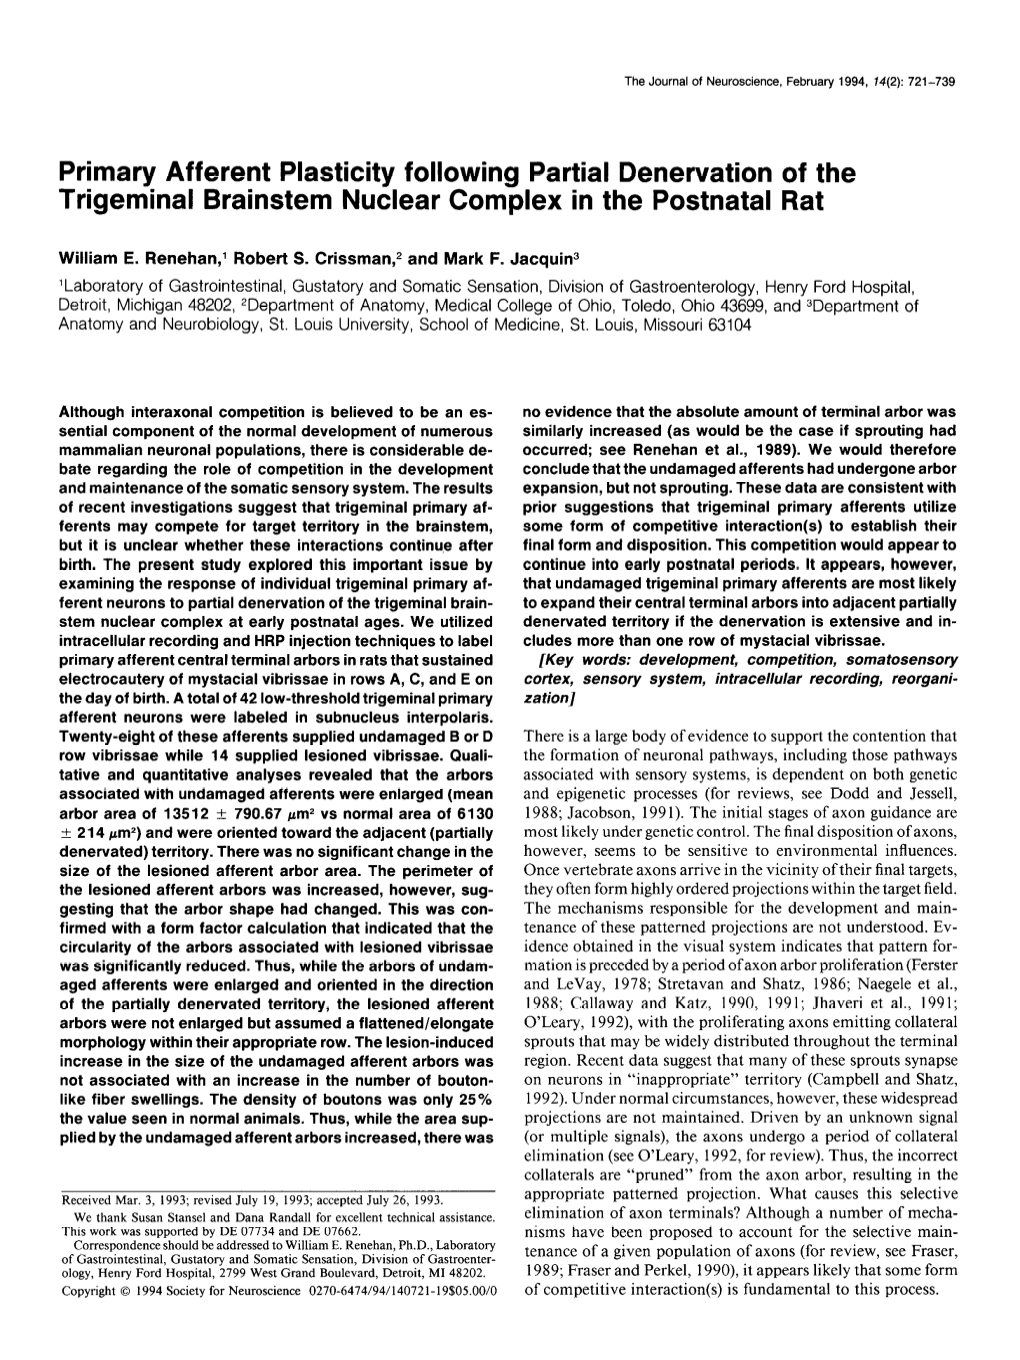 Primary Afferent Plasticity Following Partial Denervation of the Trigeminal Brainstem Nuclear Complex in the Postnatal Rat